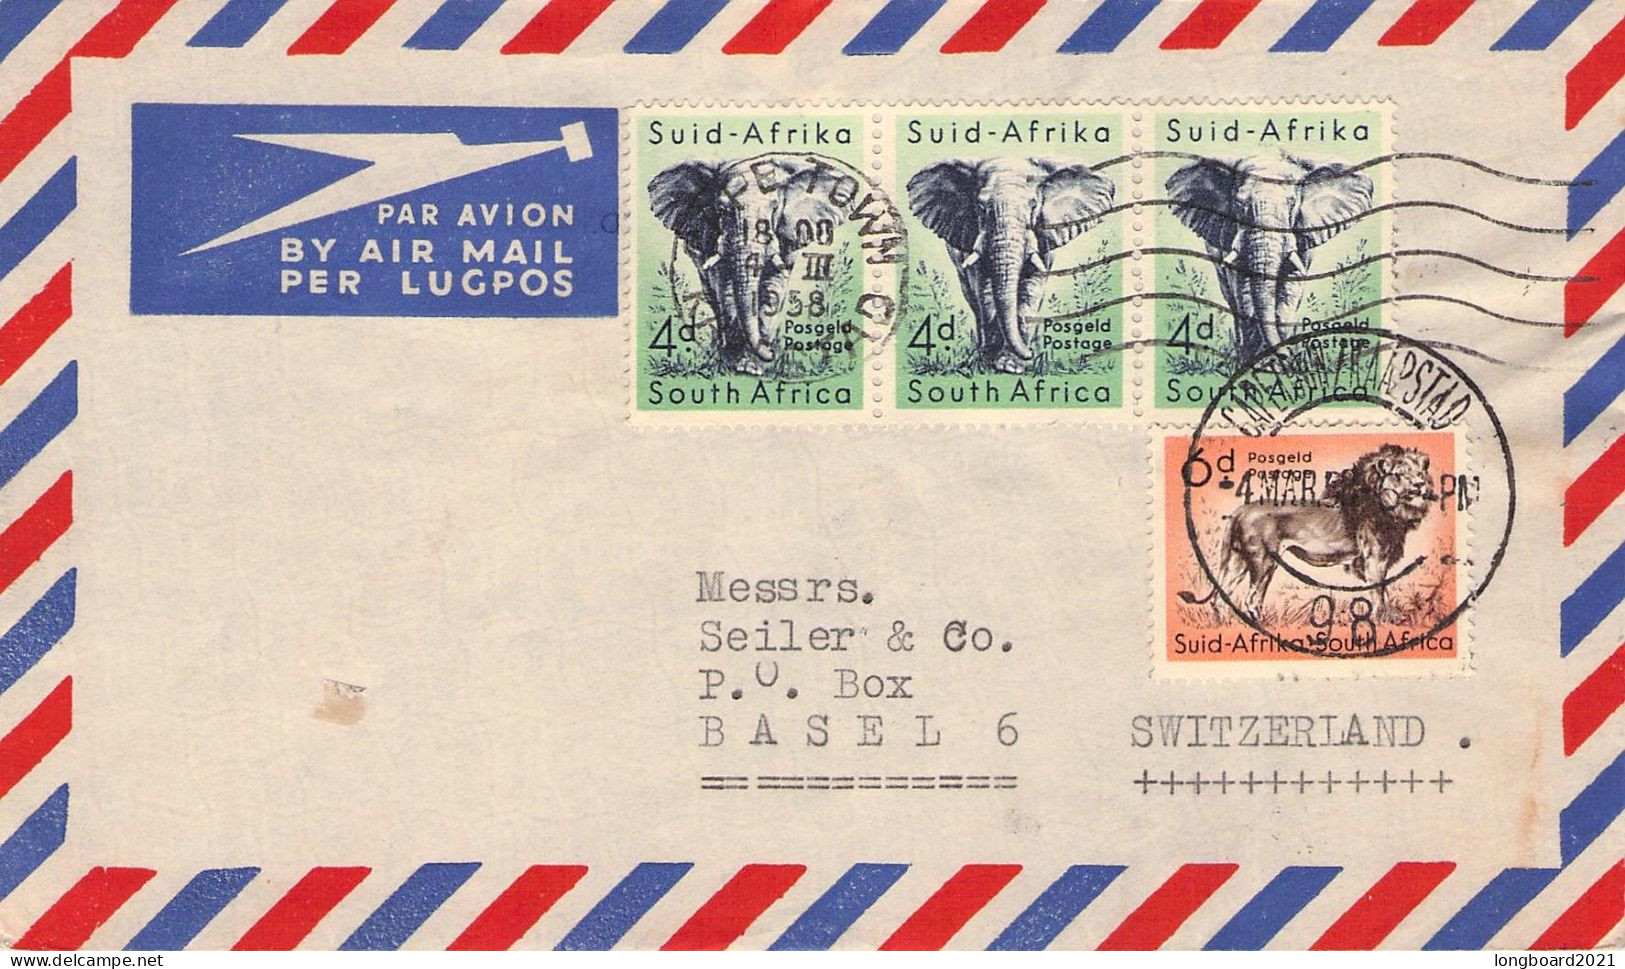 SOUTH AFRICA - MAIL 1958 CAPE TOWN - BASEL/CH / 5246 - Luchtpost